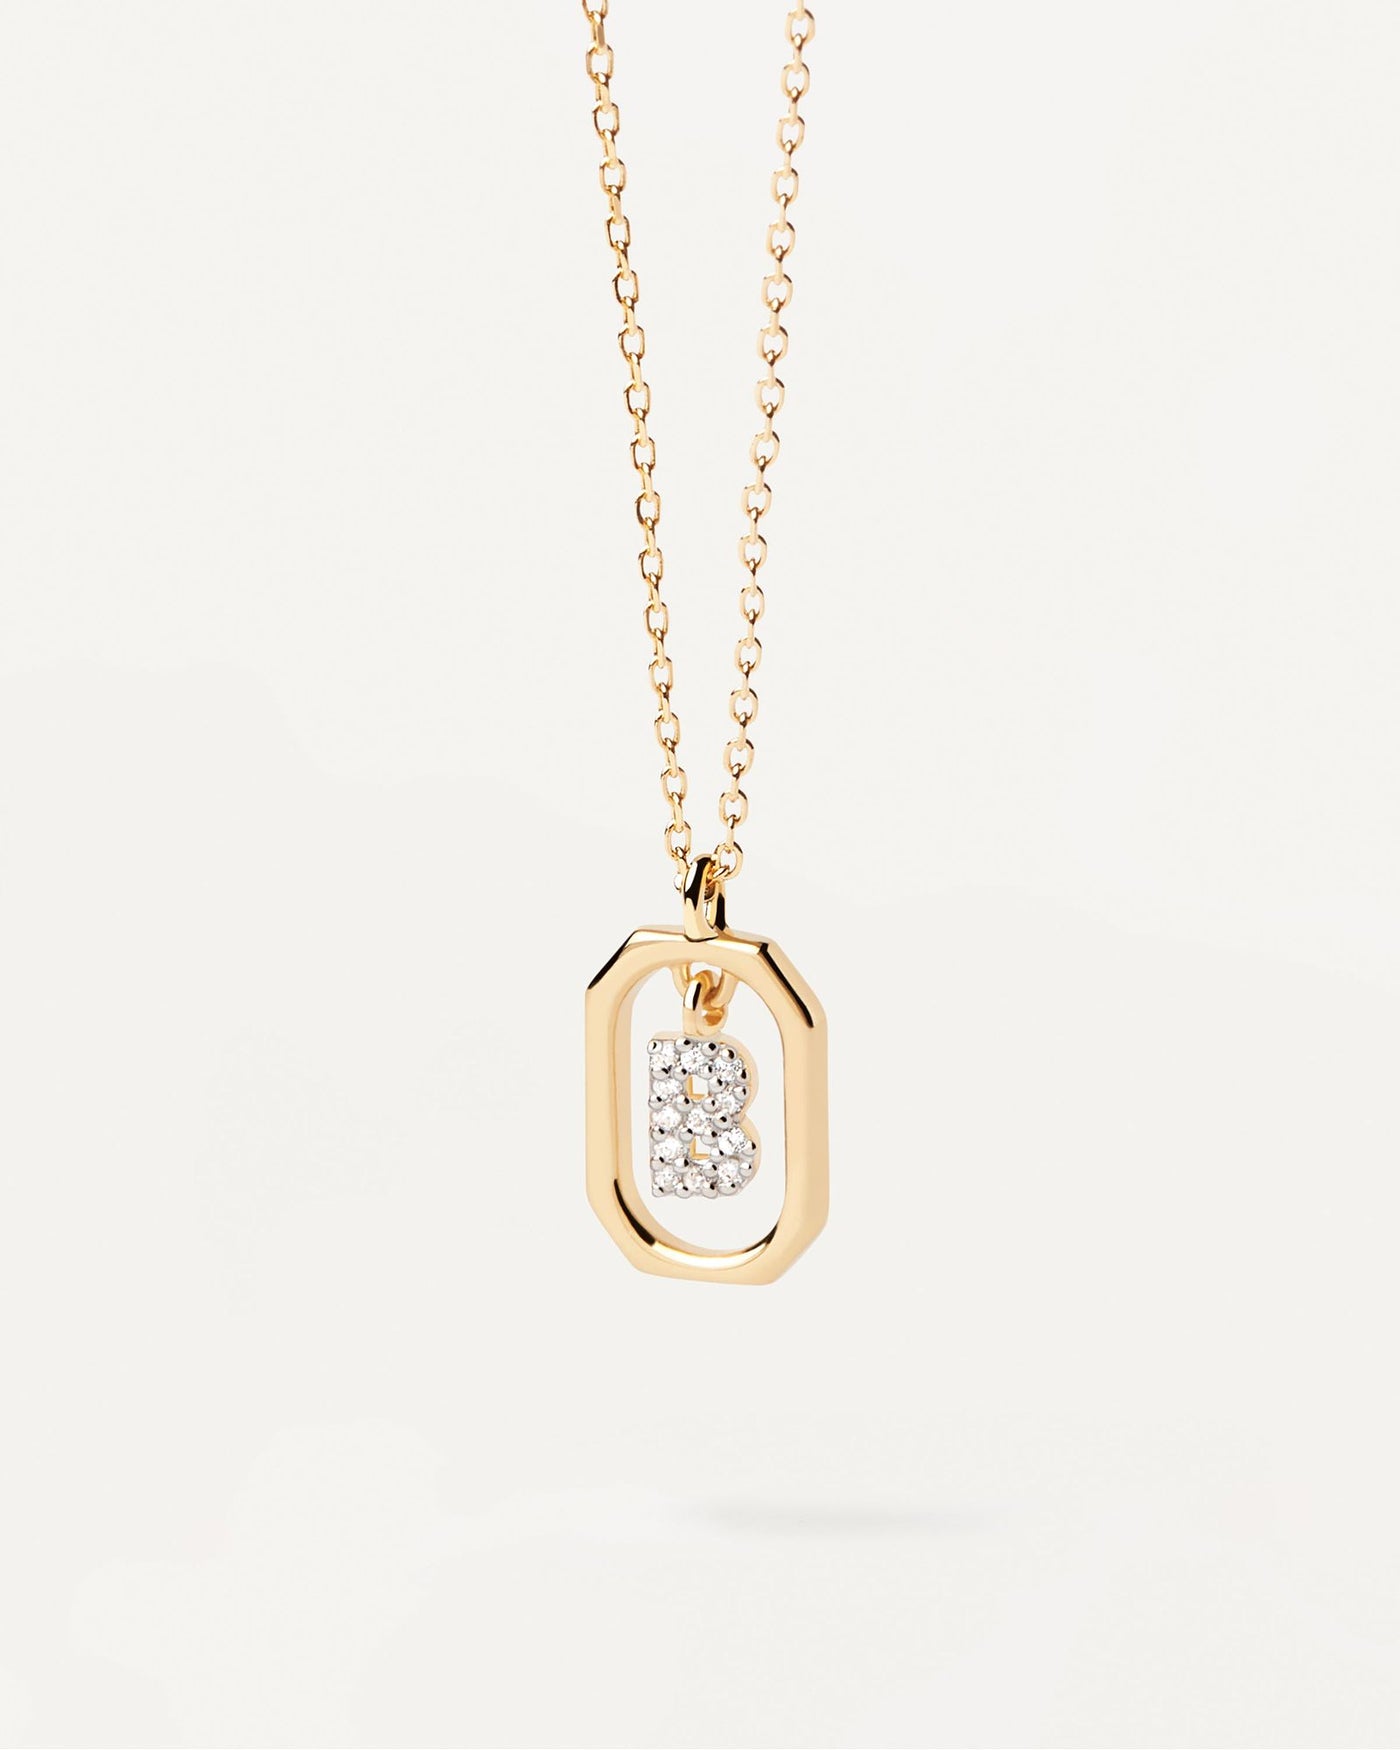 2024 Selection | Mini Letter B Necklace. Small initial B necklace in zirconia inside gold-plated silver octagonal pendant. Get the latest arrival from PDPAOLA. Place your order safely and get this Best Seller. Free Shipping.